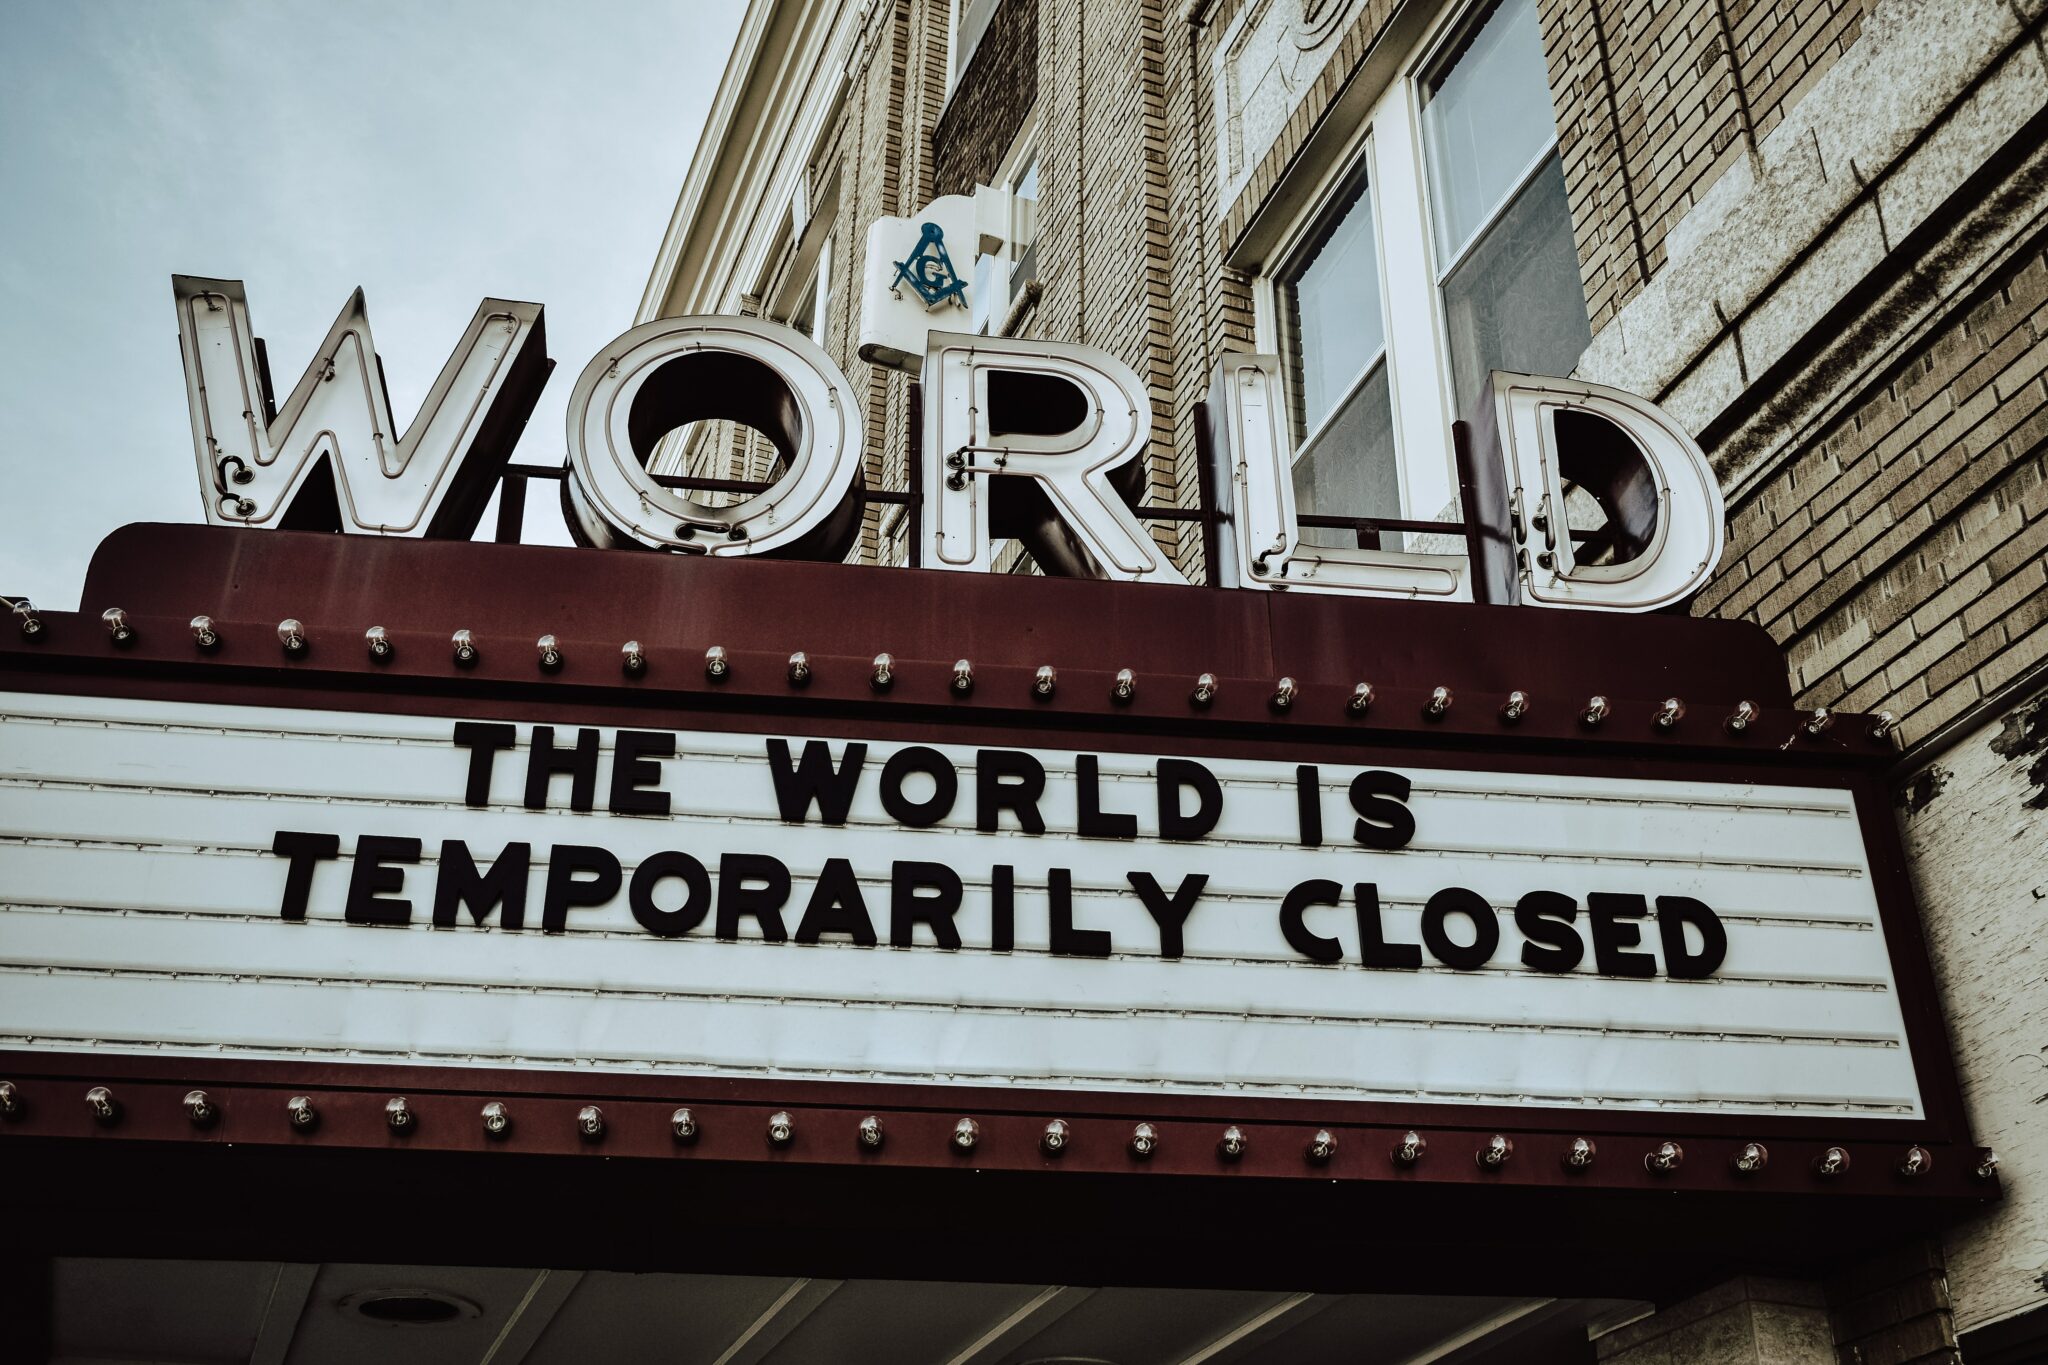 The World is Temporarily Closed letters in Brown colour